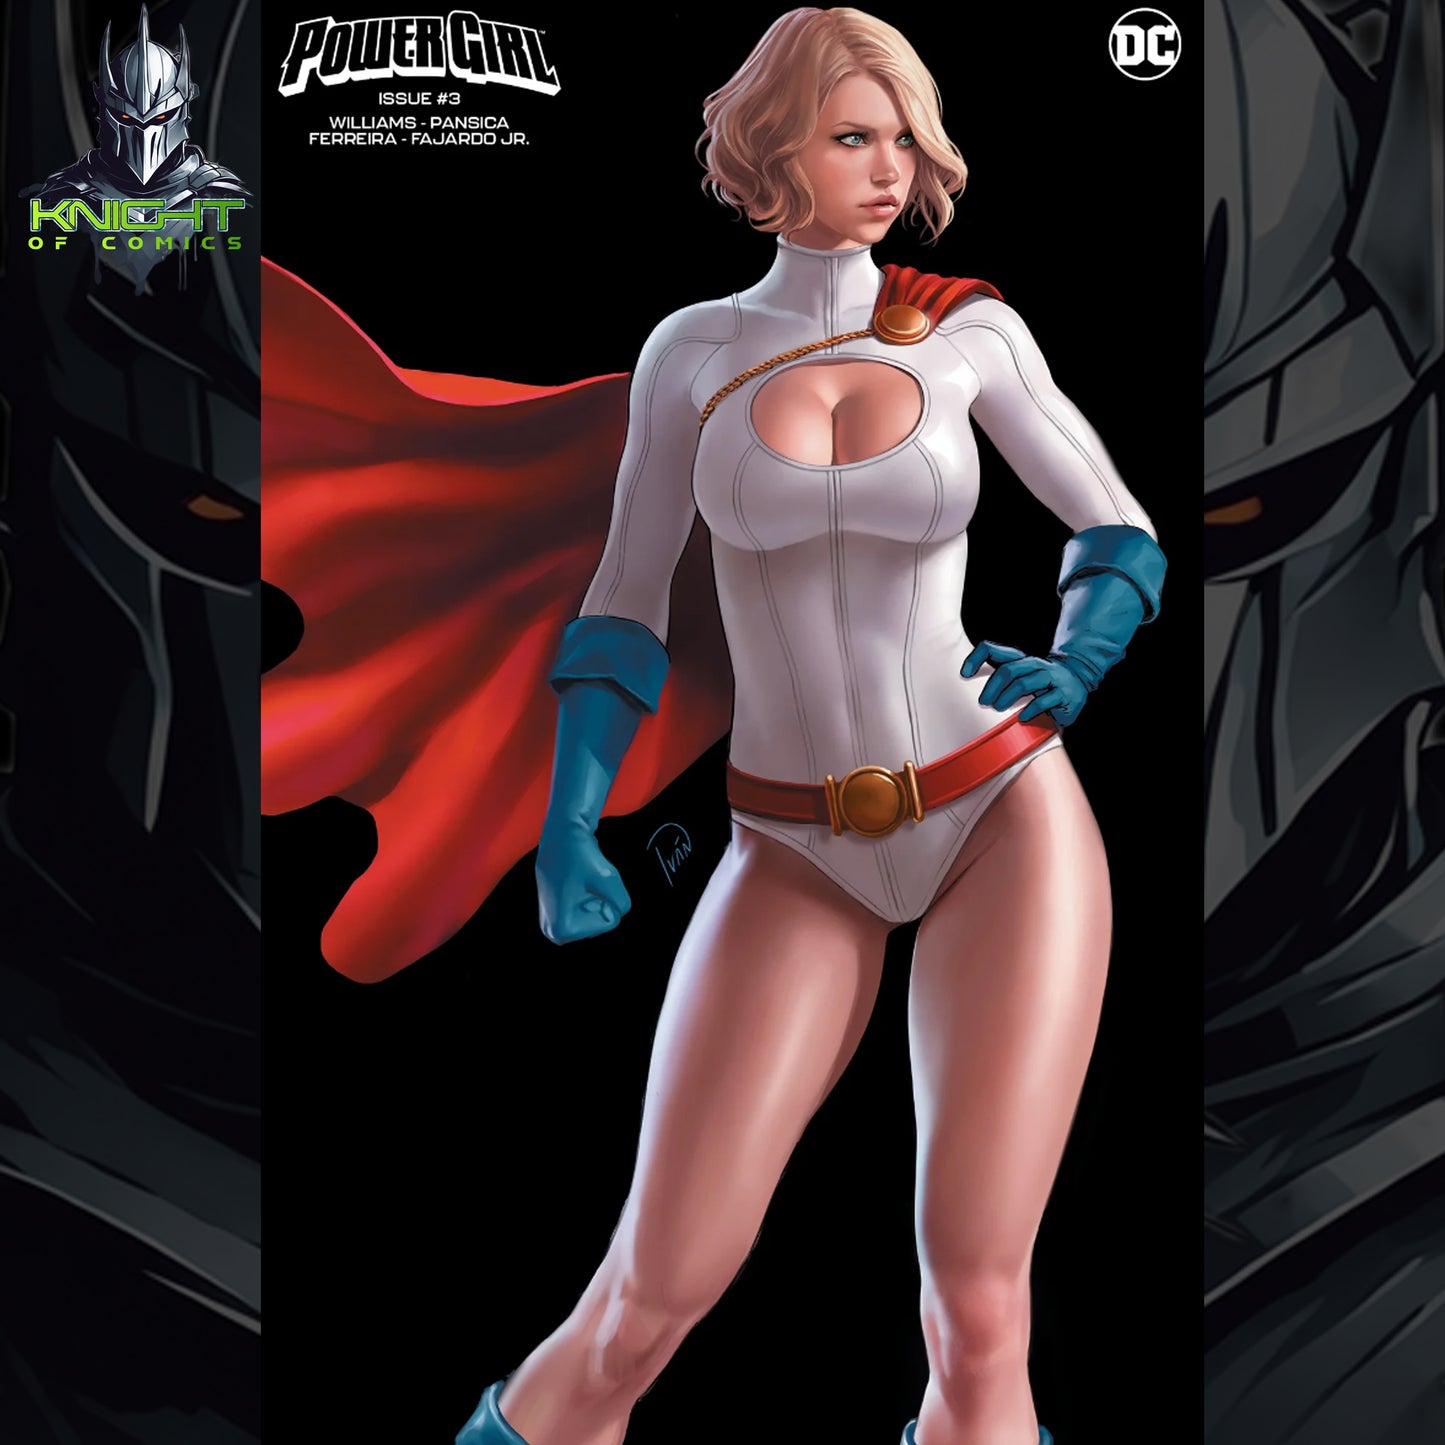 POWER GIRL #3 - IVAN TALAVERA VARIANT EXCLUSIVE LIMITED 1500